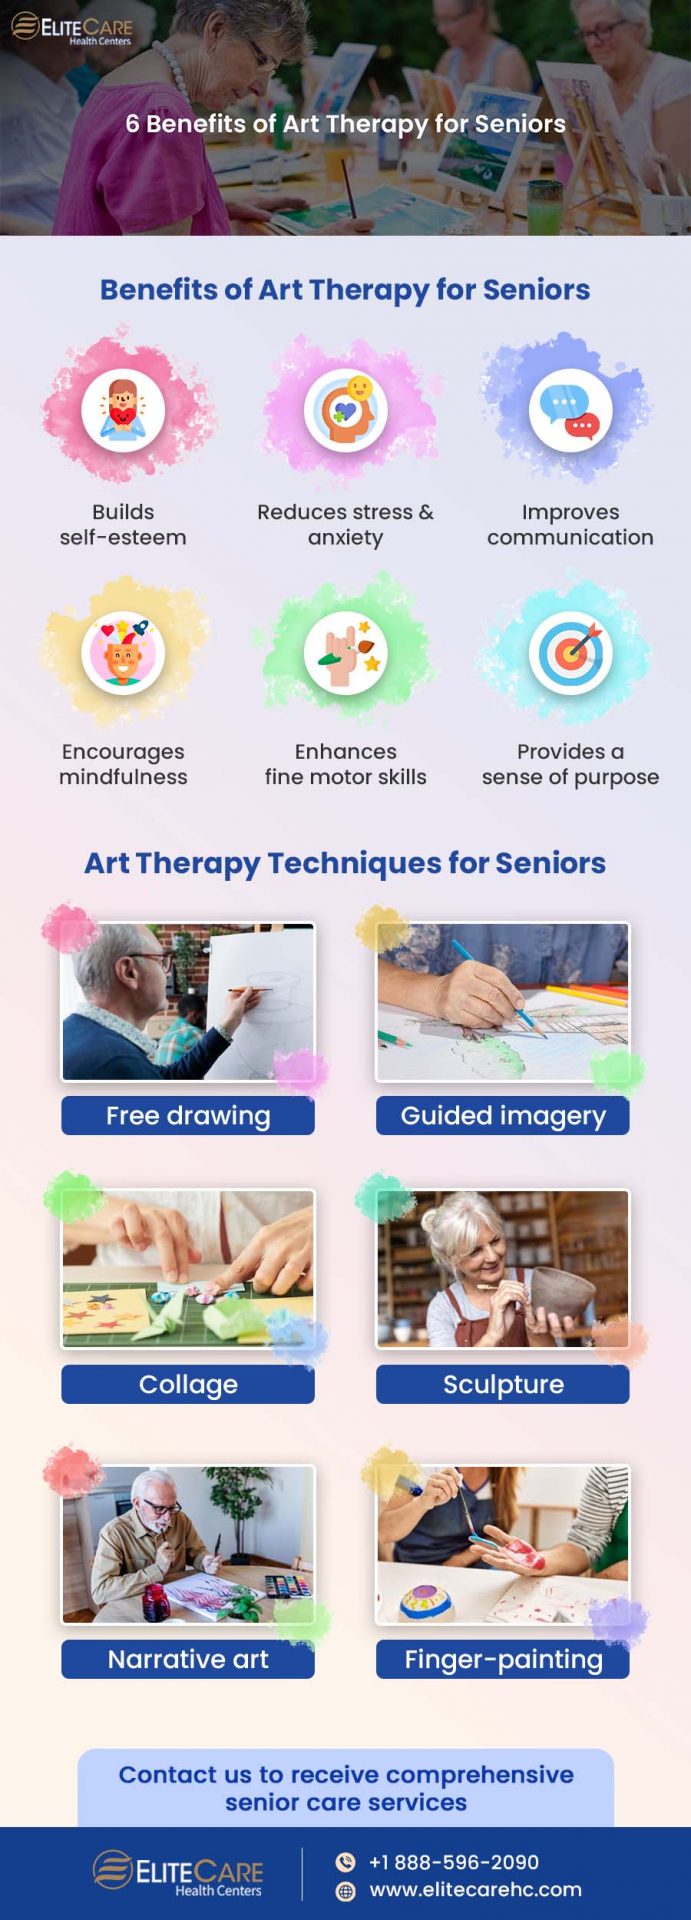 6 Benefits of Art Therapy for Seniors | Infographic